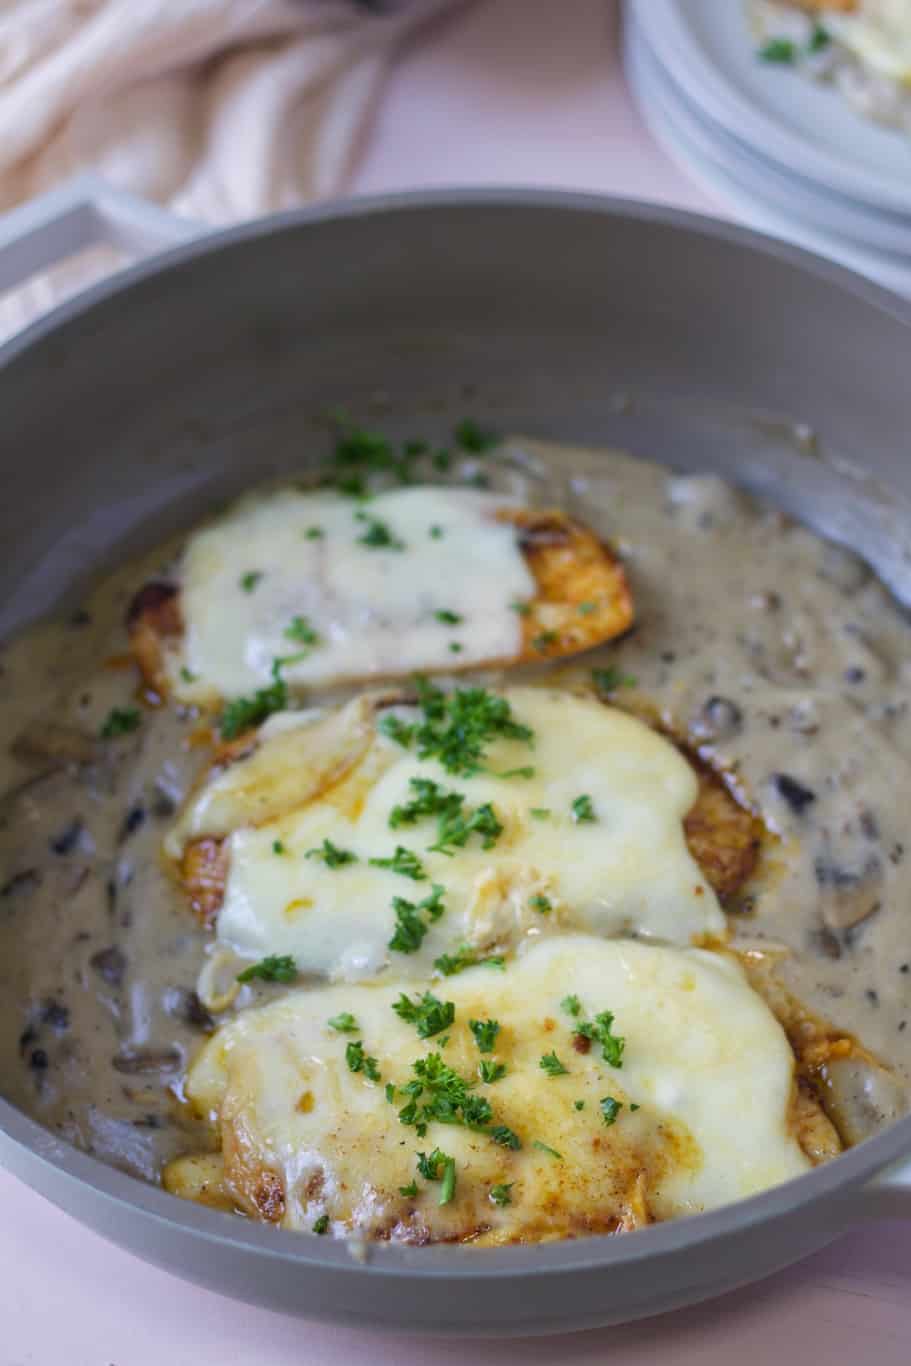 Chicken breasts topped with cheese and served with a creamy mushroom sauce